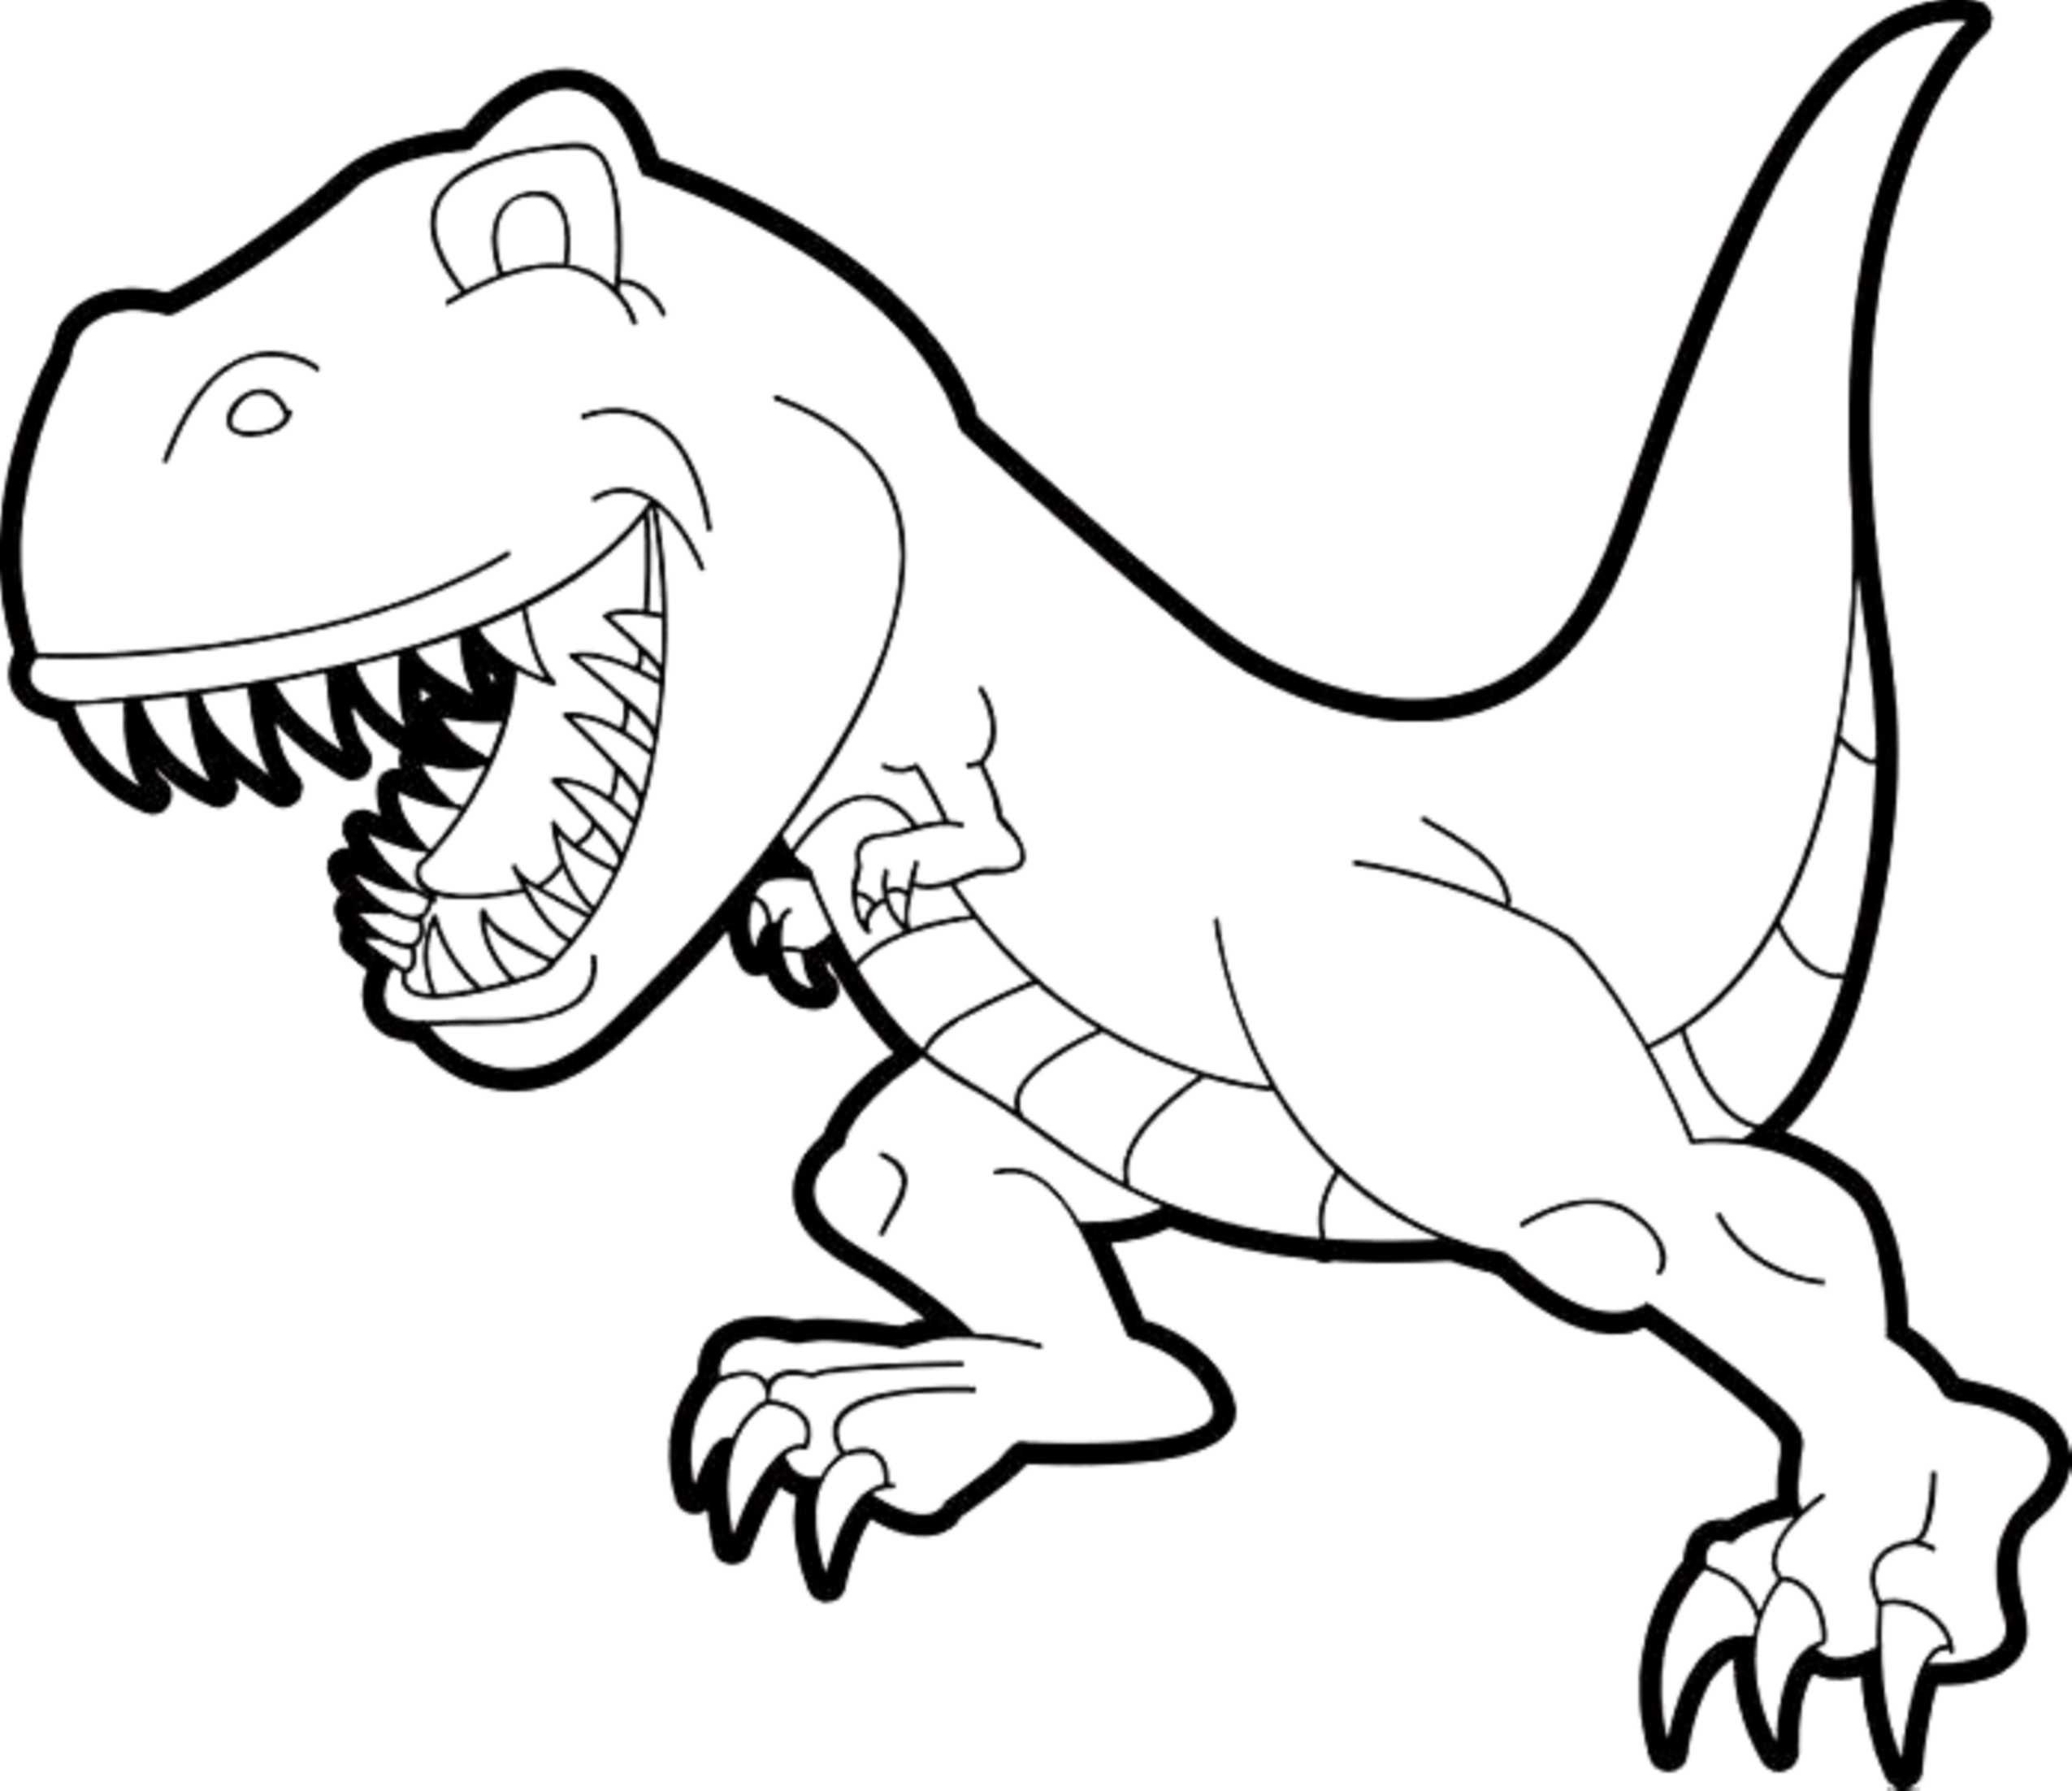 coloring-page-of-a-t-rex-of-coloring-page-of-a-t-rex Coloring Page Of A T Rex Dinosaurs 